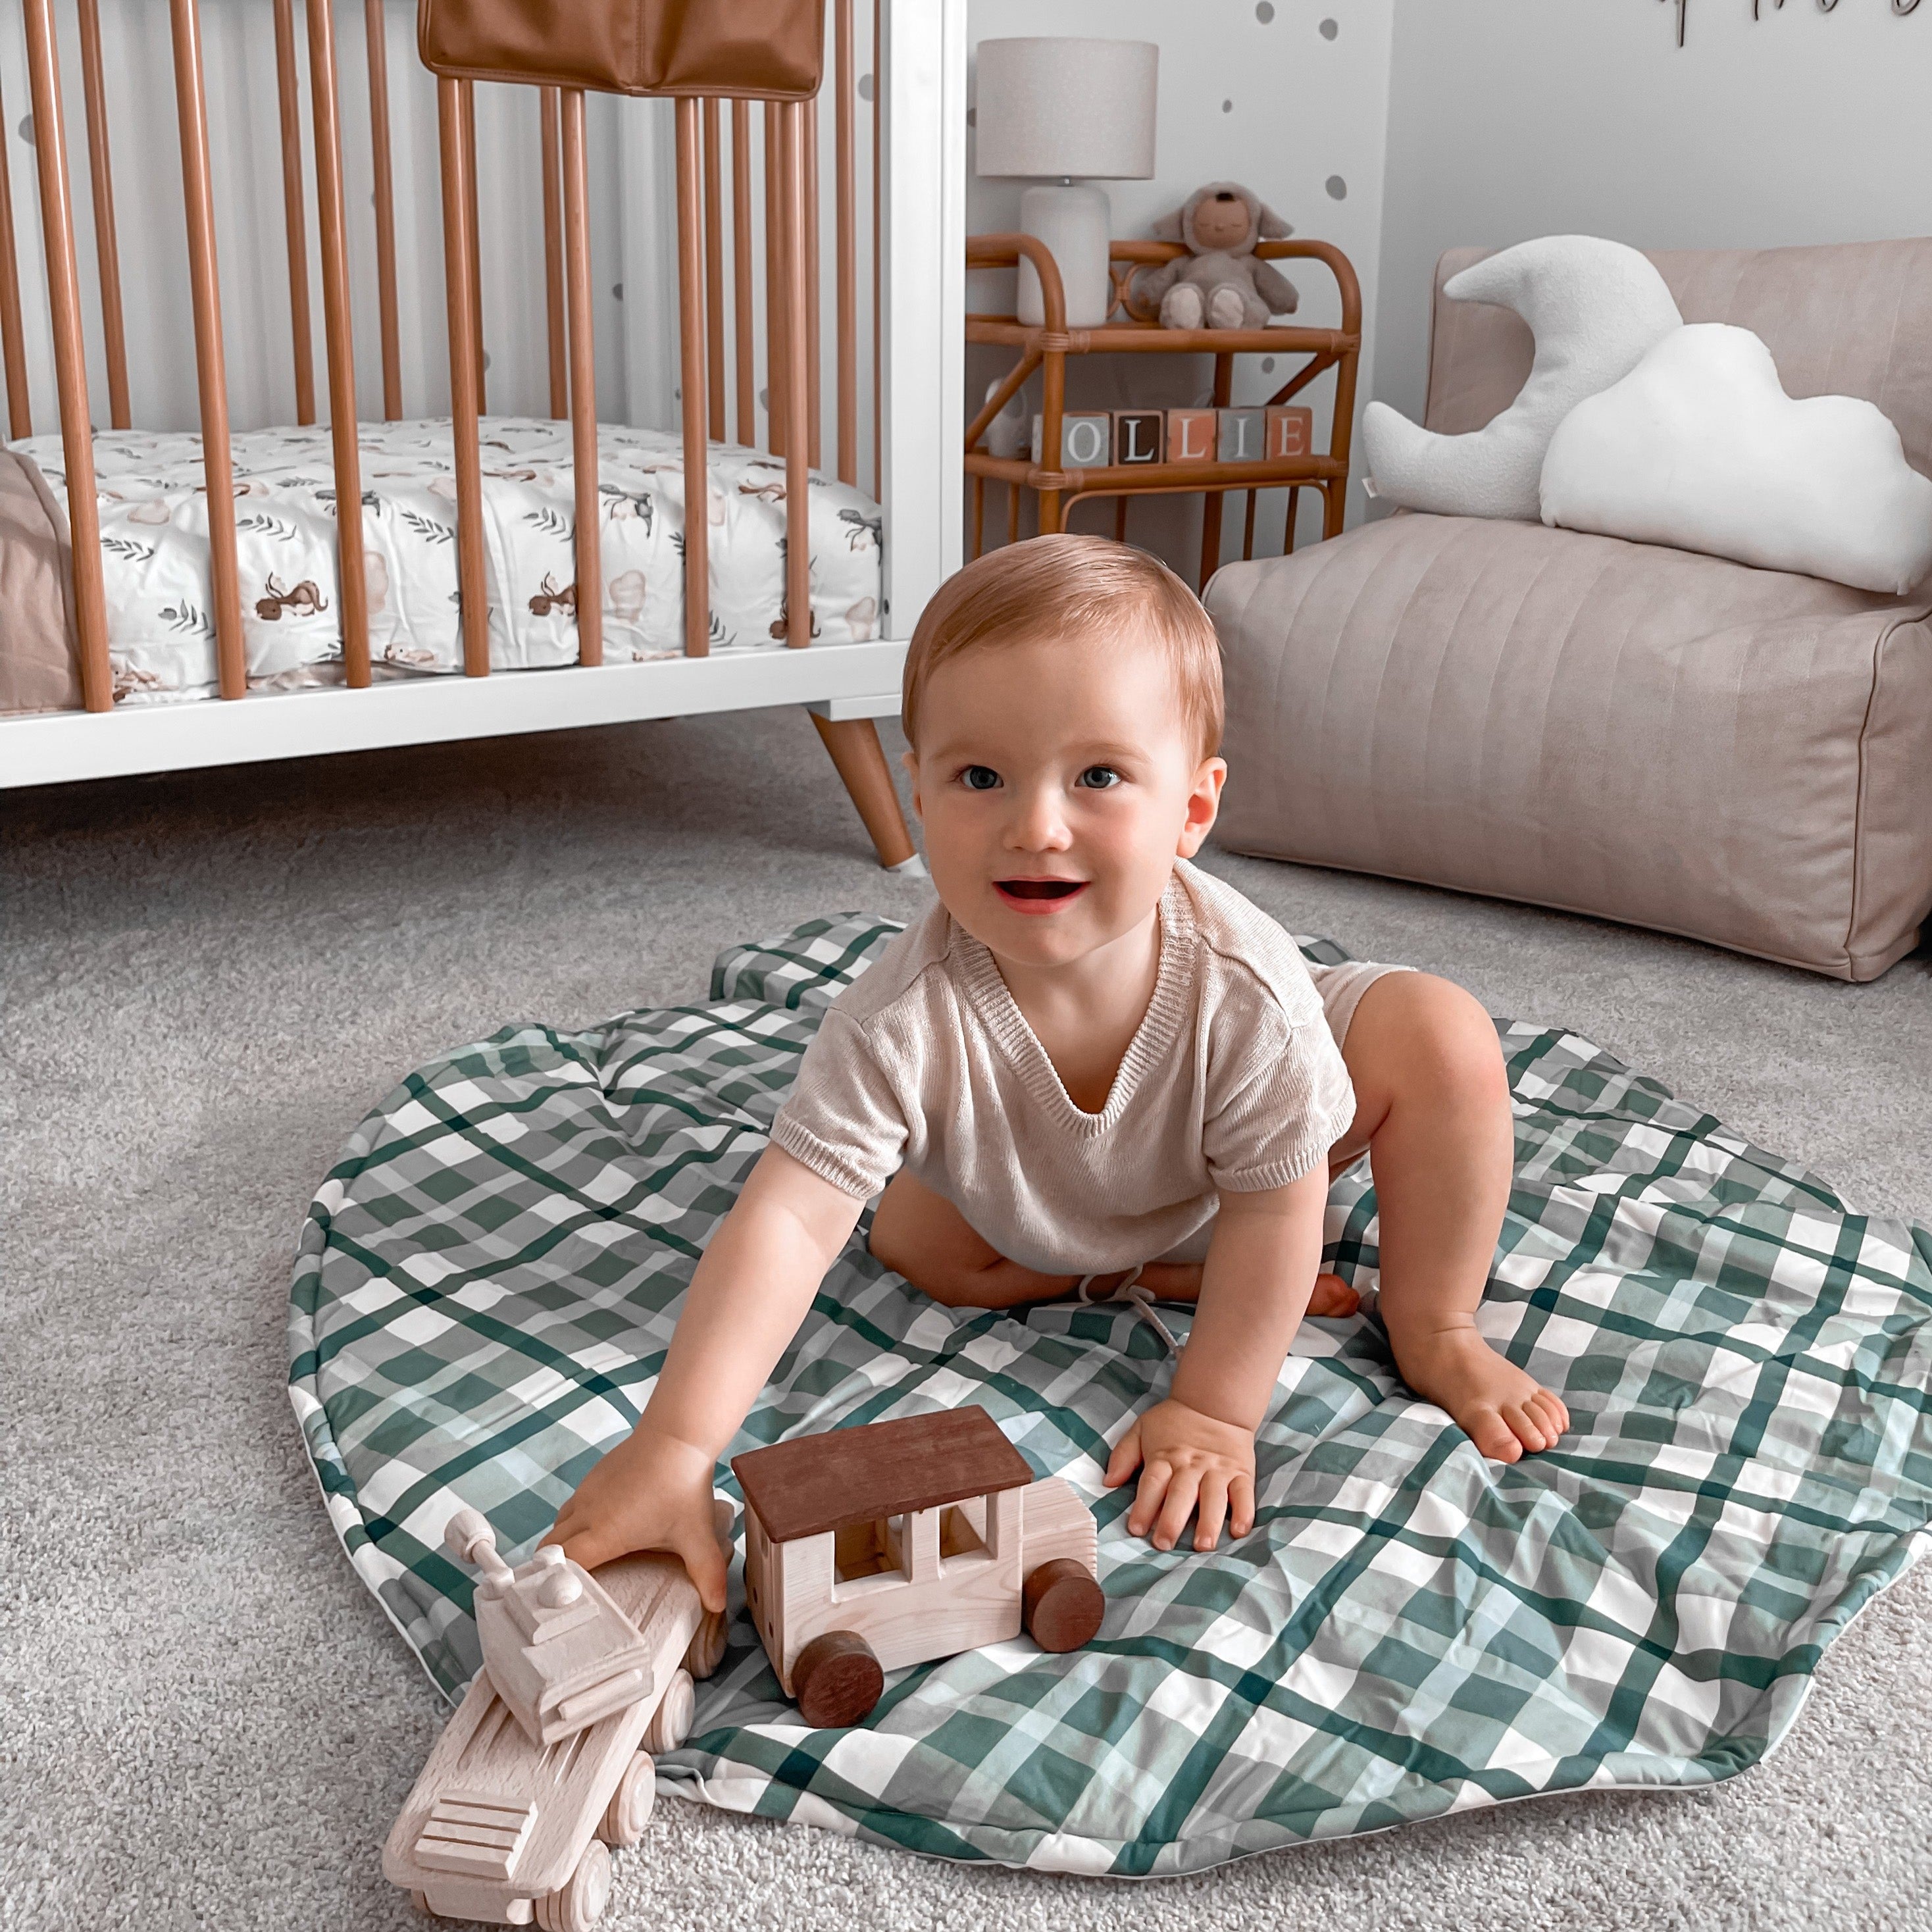 Little boy sitting on a blue cyprus plaid playmat playing with his toys in the middle a stylish nursery